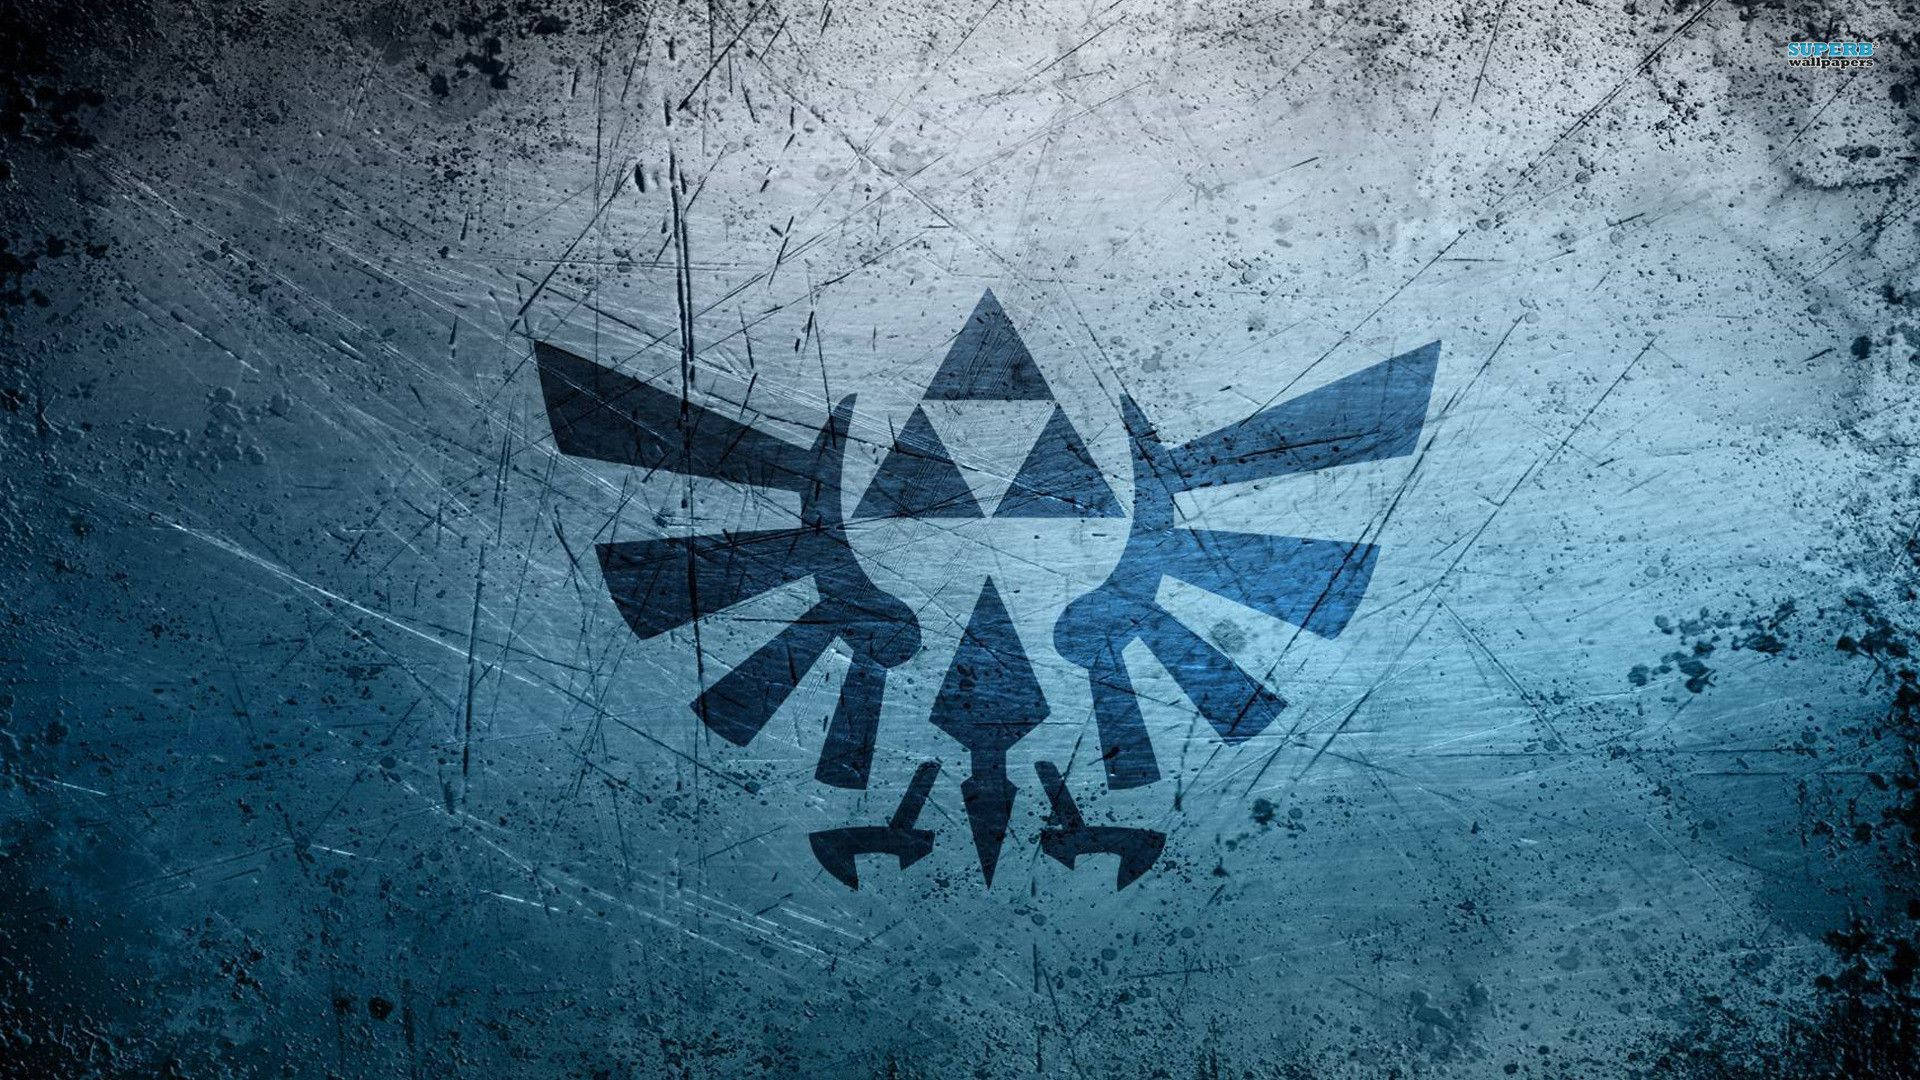 Hd The Legend Of Zelda Gaming Cover